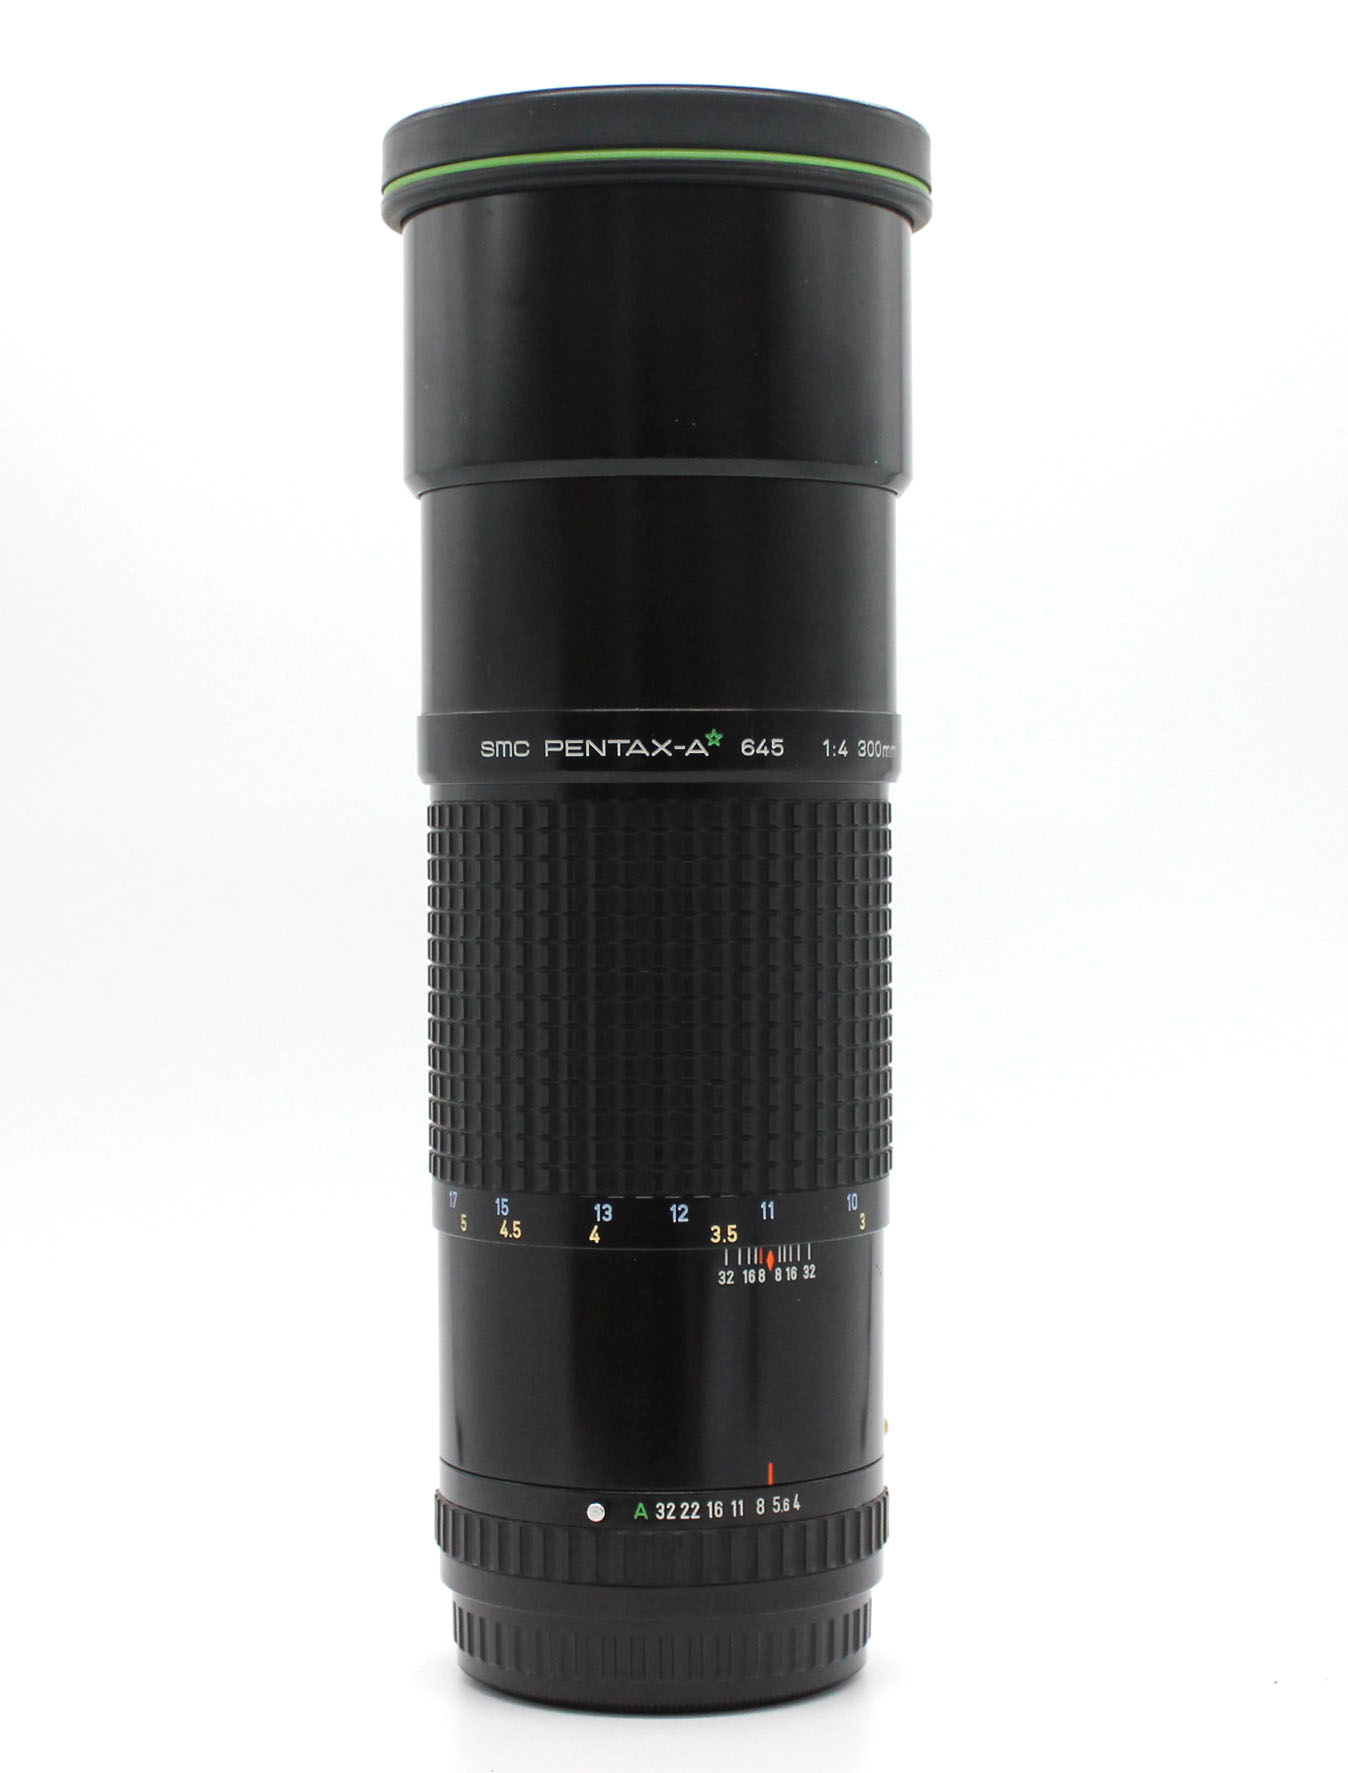 SMC Pentax-A * 645 300mm F/4 ED IF Green Star MF Telephoto Lens from Japan Photo 3